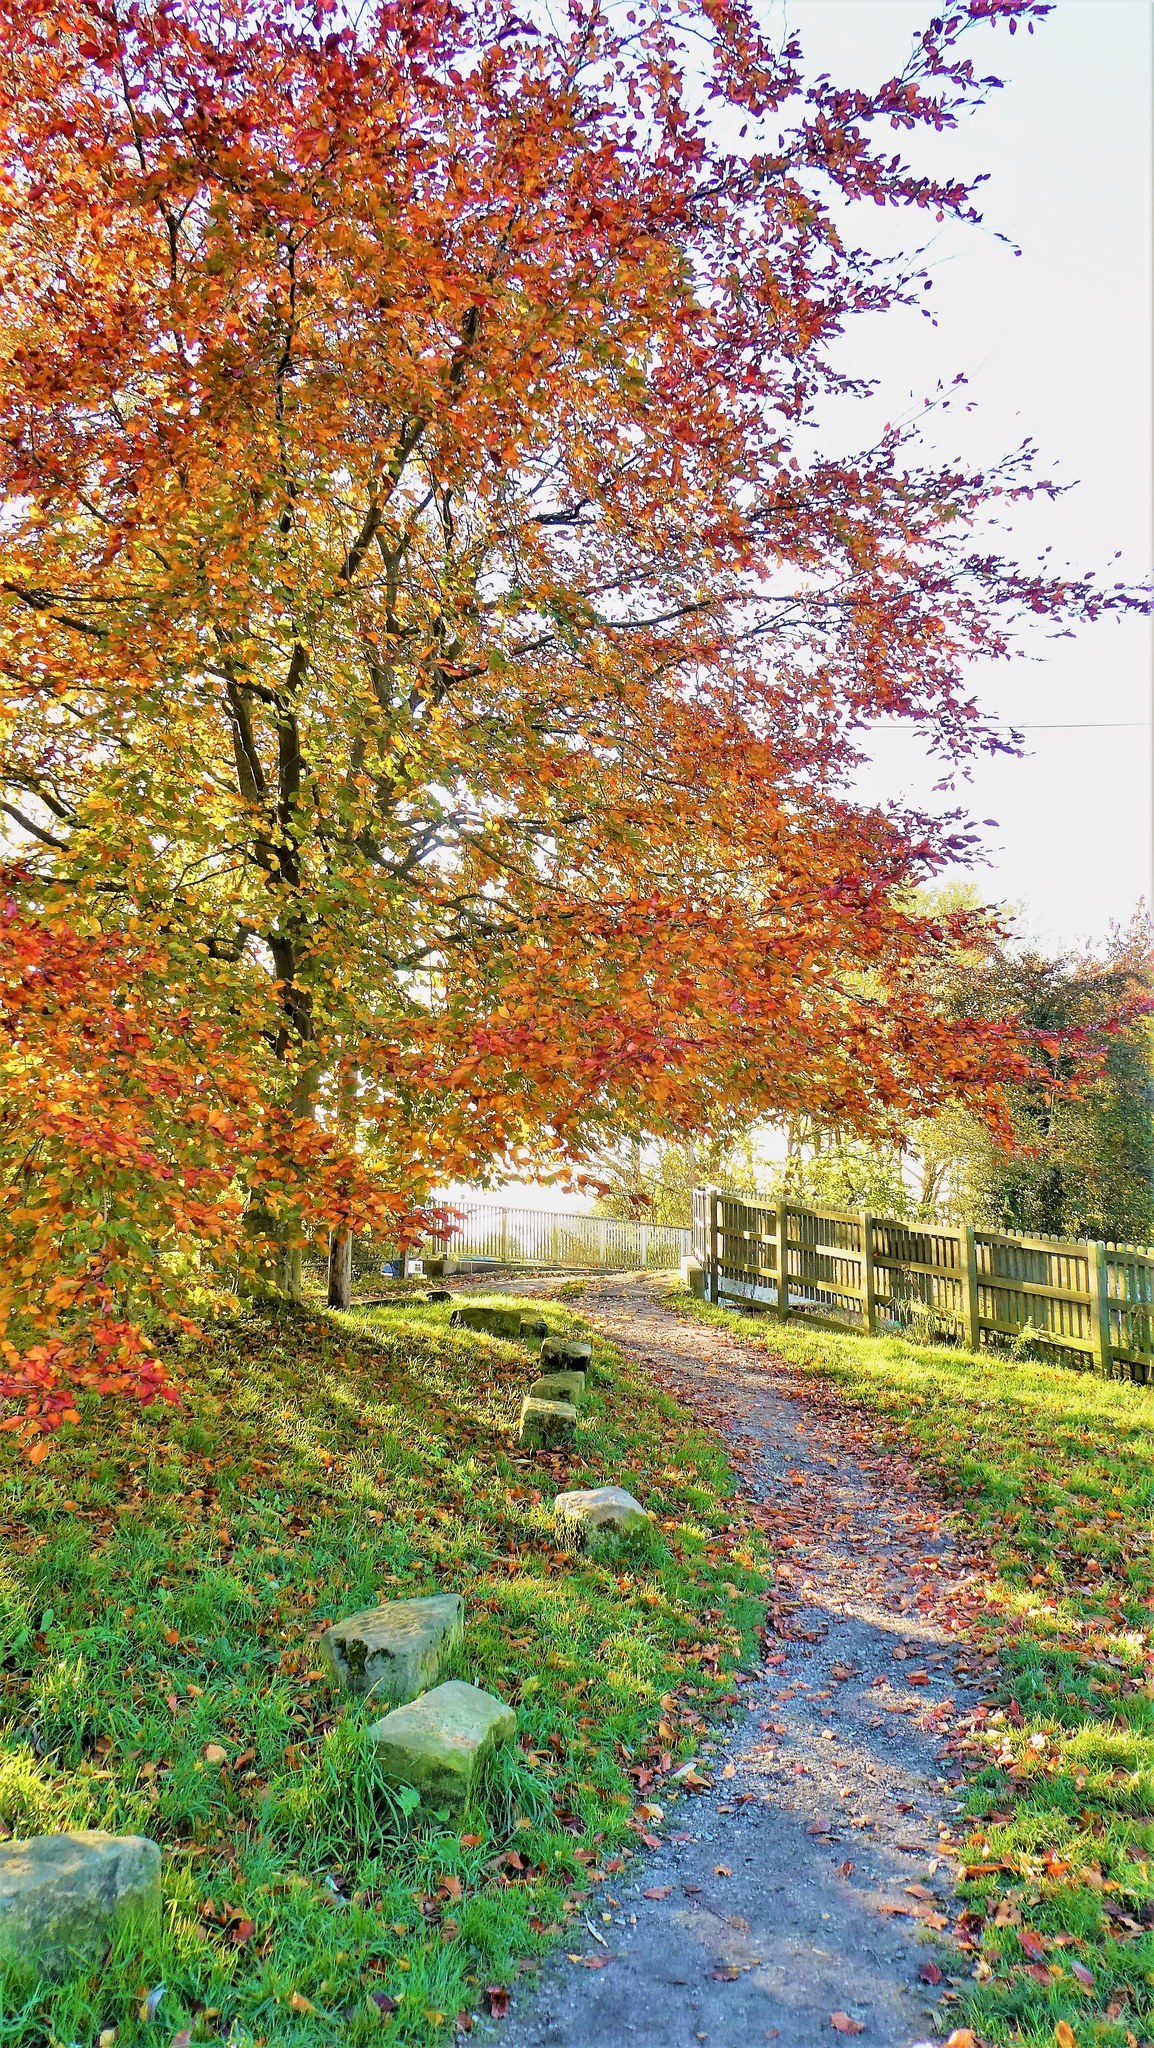 Signs of autumn in Anderton by Lynne Bentley